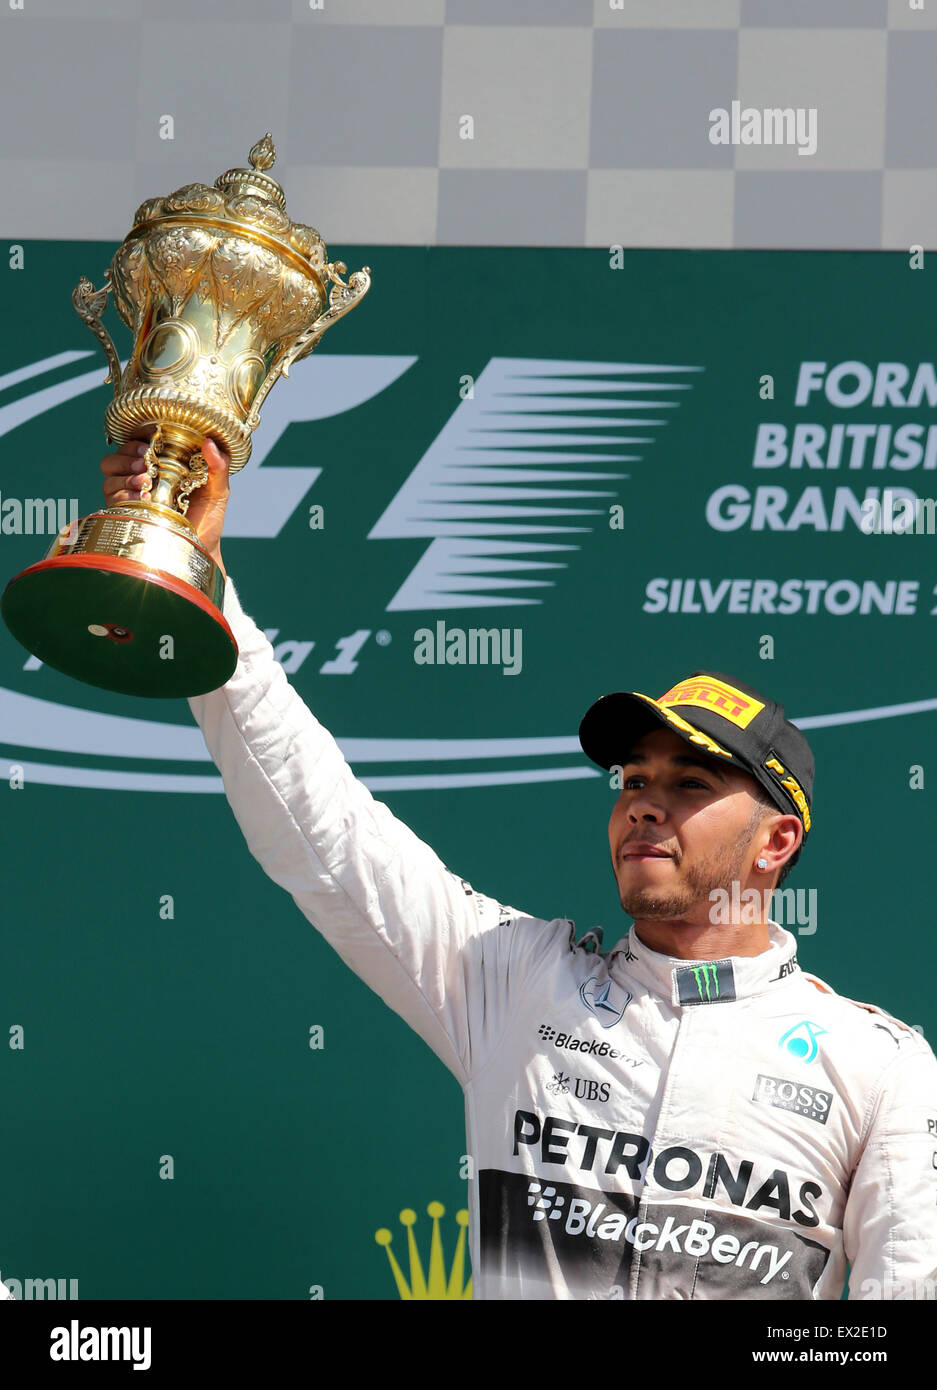 Silverstone on X: The last 4 trophy lifts at the @F1 British Grand Prix 🏆  Who lifts the trophy in 2022? #F1 #BritishGP  / X